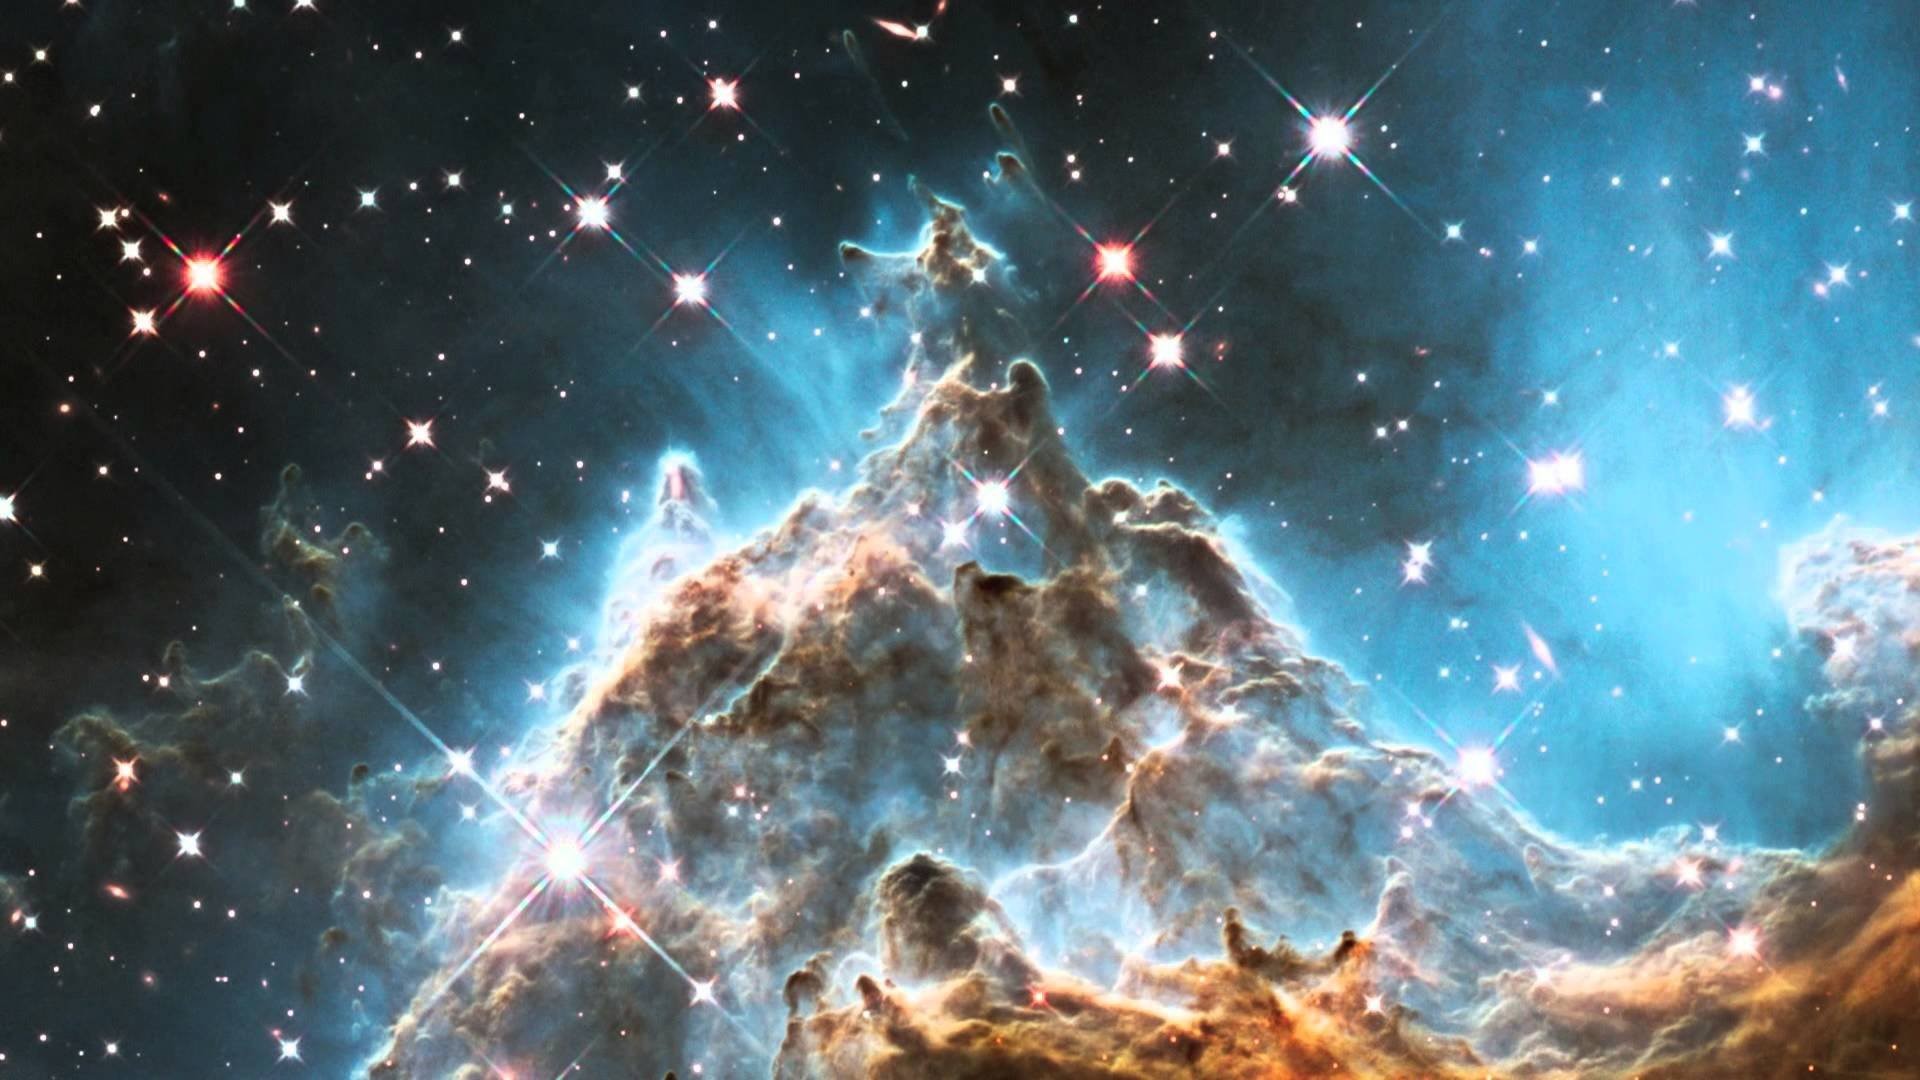 1920x1080 Space outer universe stars photography detail astronomy nasa hubble  wallpaper |  | 670123 | WallpaperUP